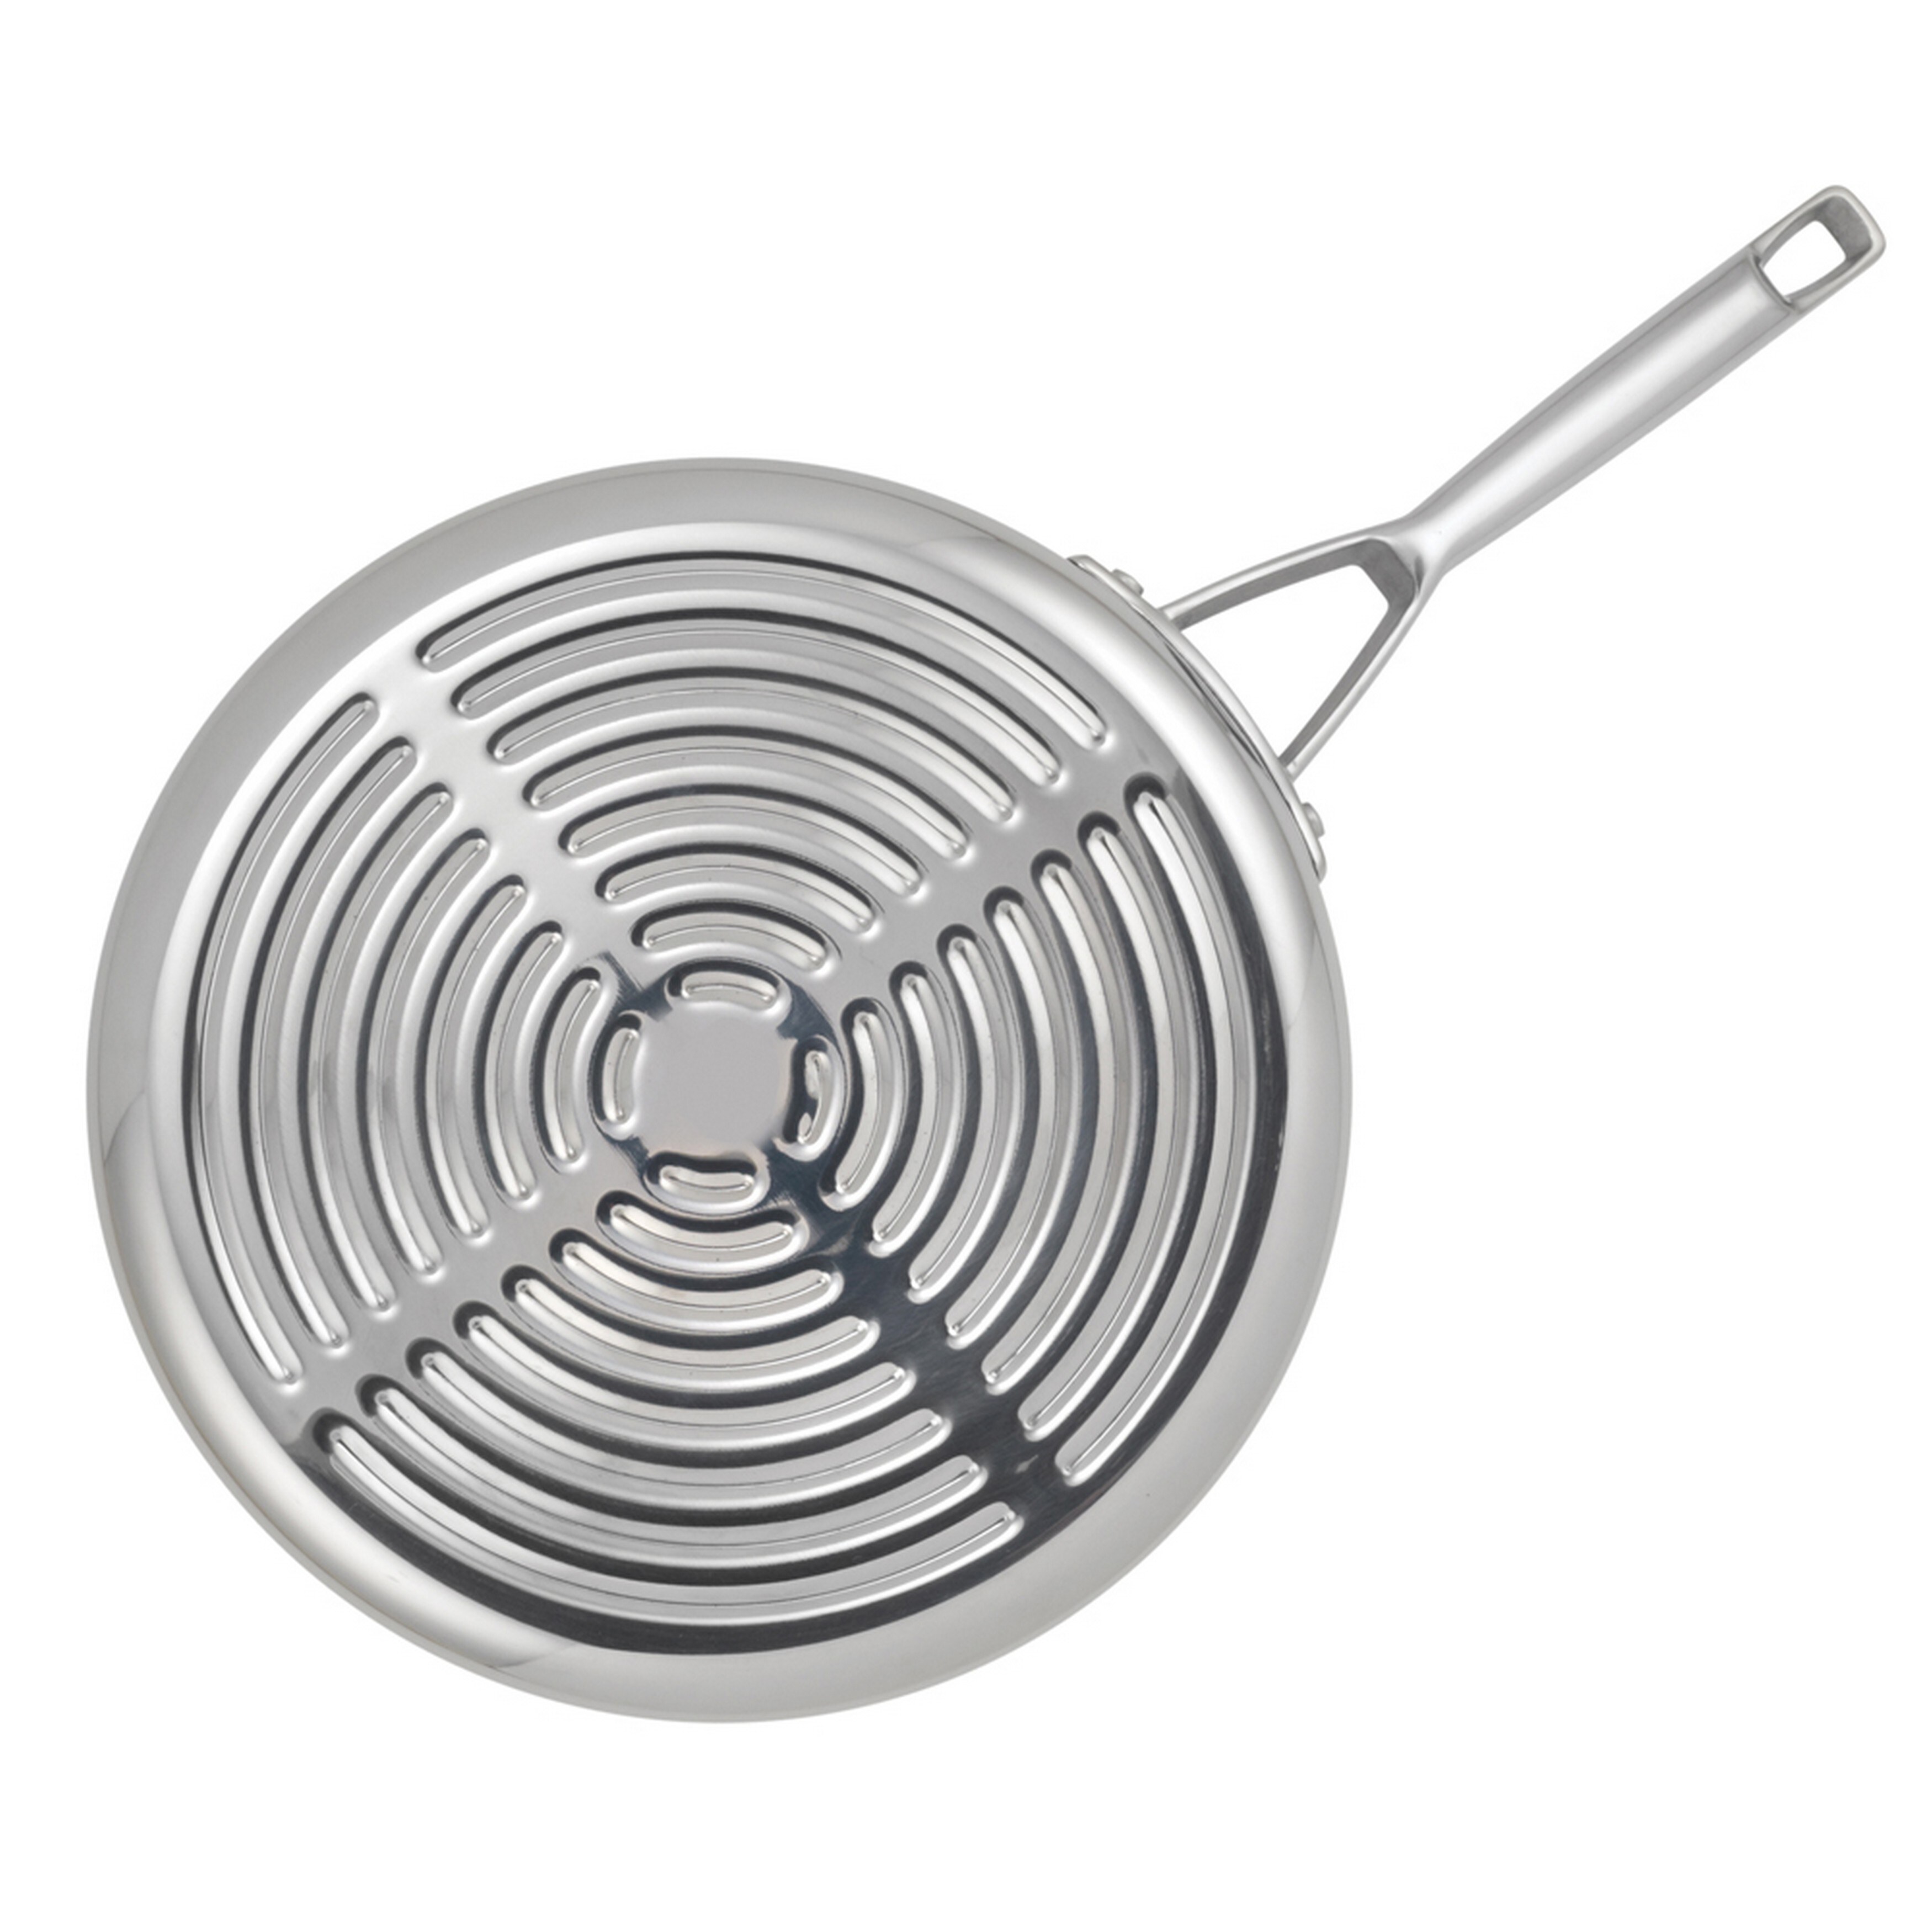 Anolon Tri-Ply Clad Stainless Steel 12-inch Deep Round Grill Pan